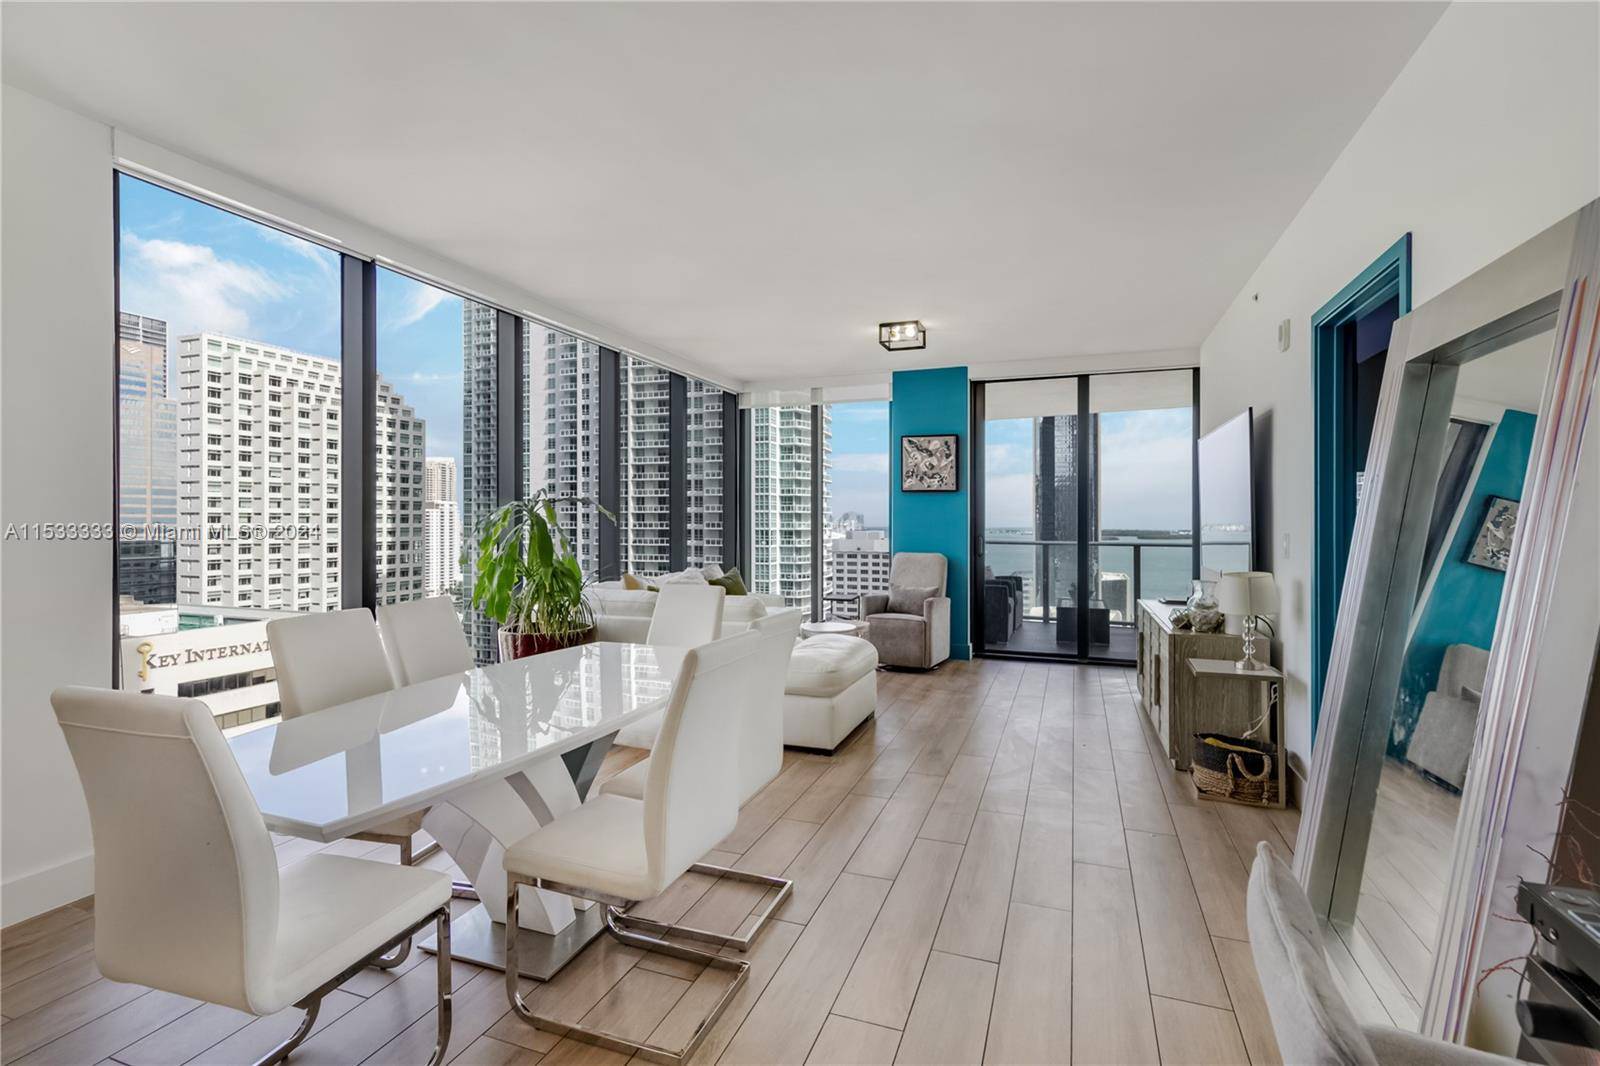 Easy to show ! Resort lifestyle the most spectacular NE BAY BRICKELL CITY VIEWS.